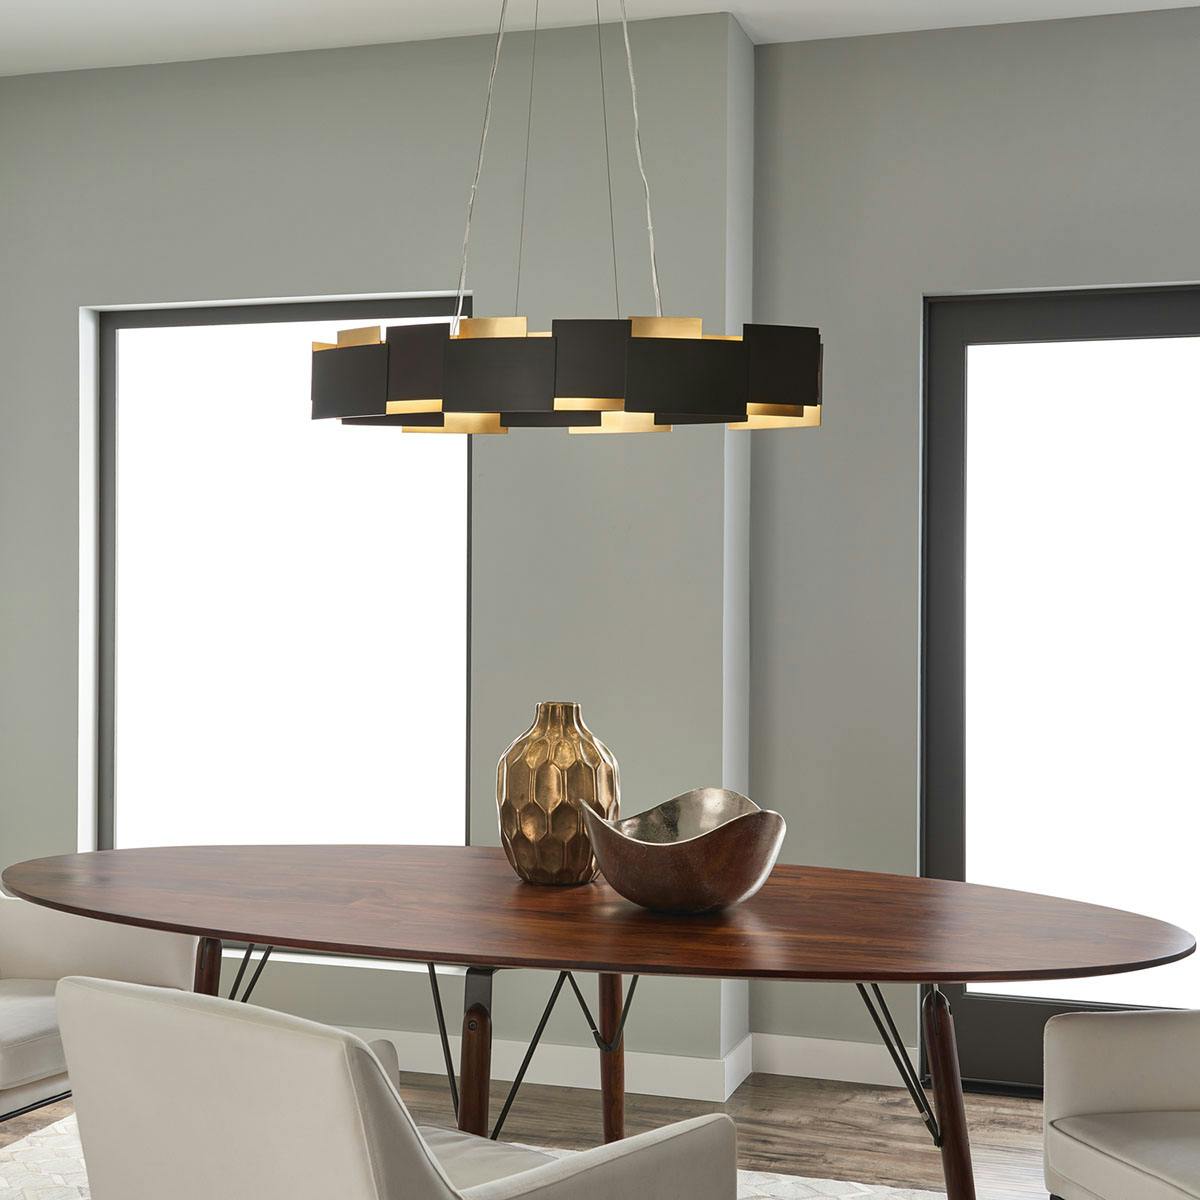 Day time dining room image featuring Moderne pendant 42993OZLED